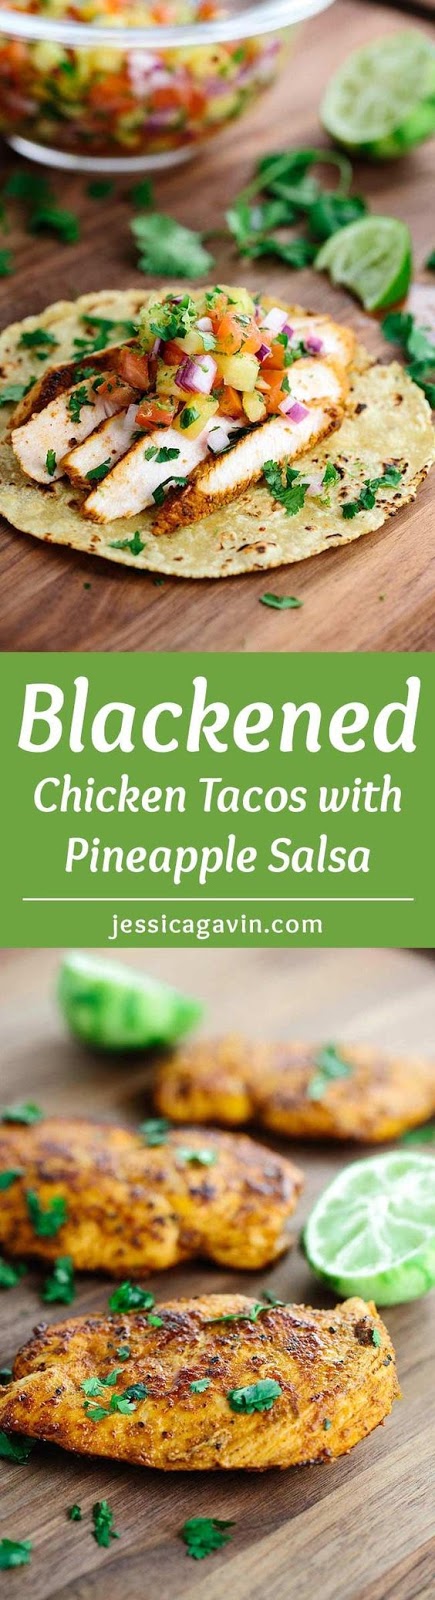 BLACKENED CHICKEN TACOS WITH PINEAPPLE SALSA